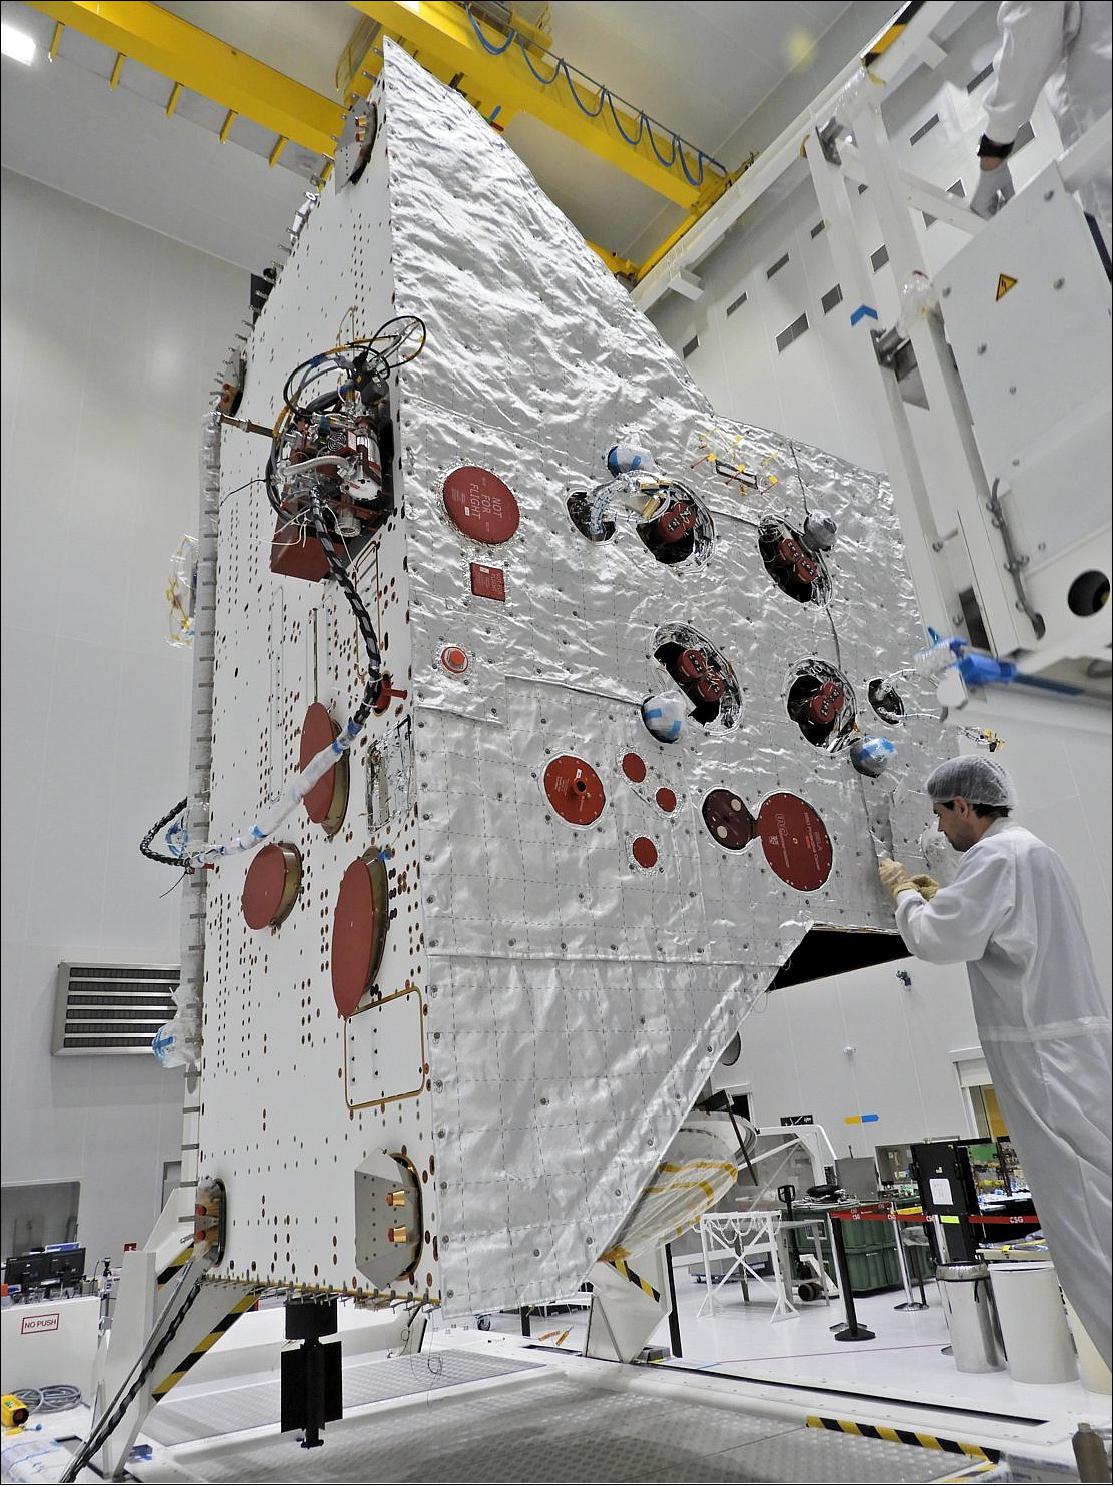 Figure 135: The insulation is to protect the spacecraft from the extreme thermal conditions that will be experienced in Mercury orbit. - While conventional multi-layered insulation appears gold-colored, the upper layer of the module’s striking white high-temperature blanket provides the focus of this image (image credit: ESA–B. Guillaume)